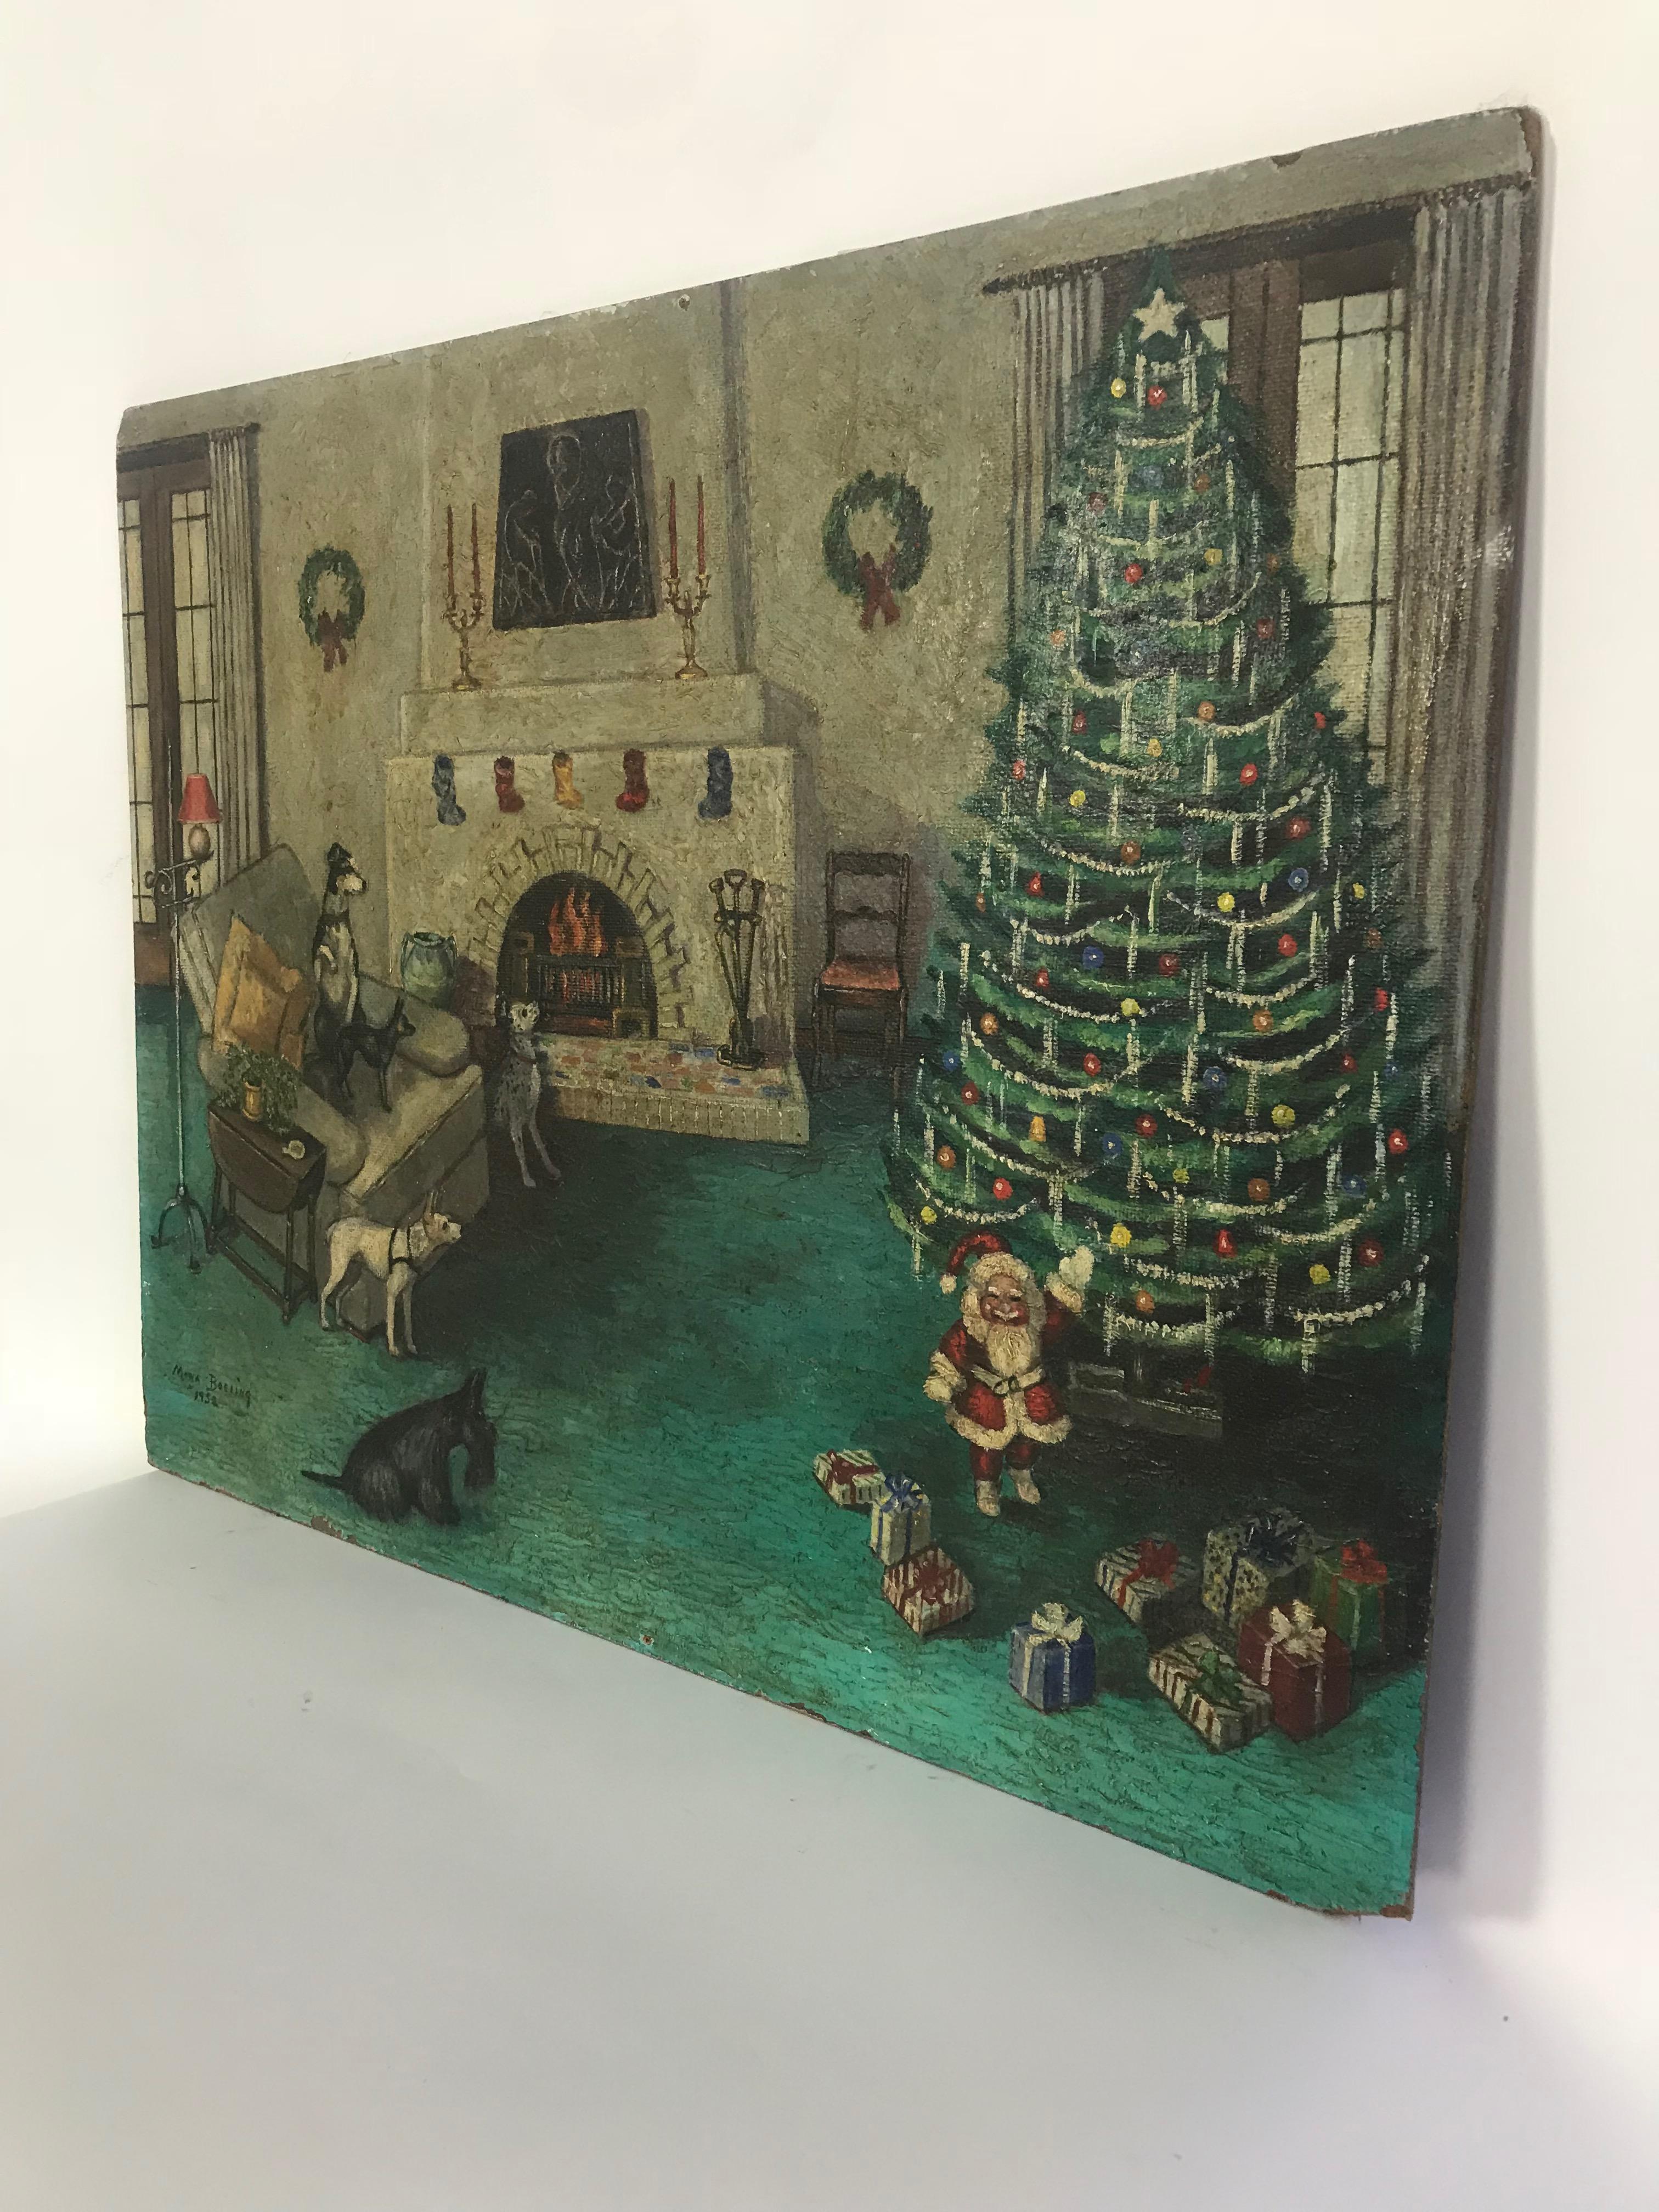 Masonite Painting of a Pack of Dogs and a Small Santa on Christmas